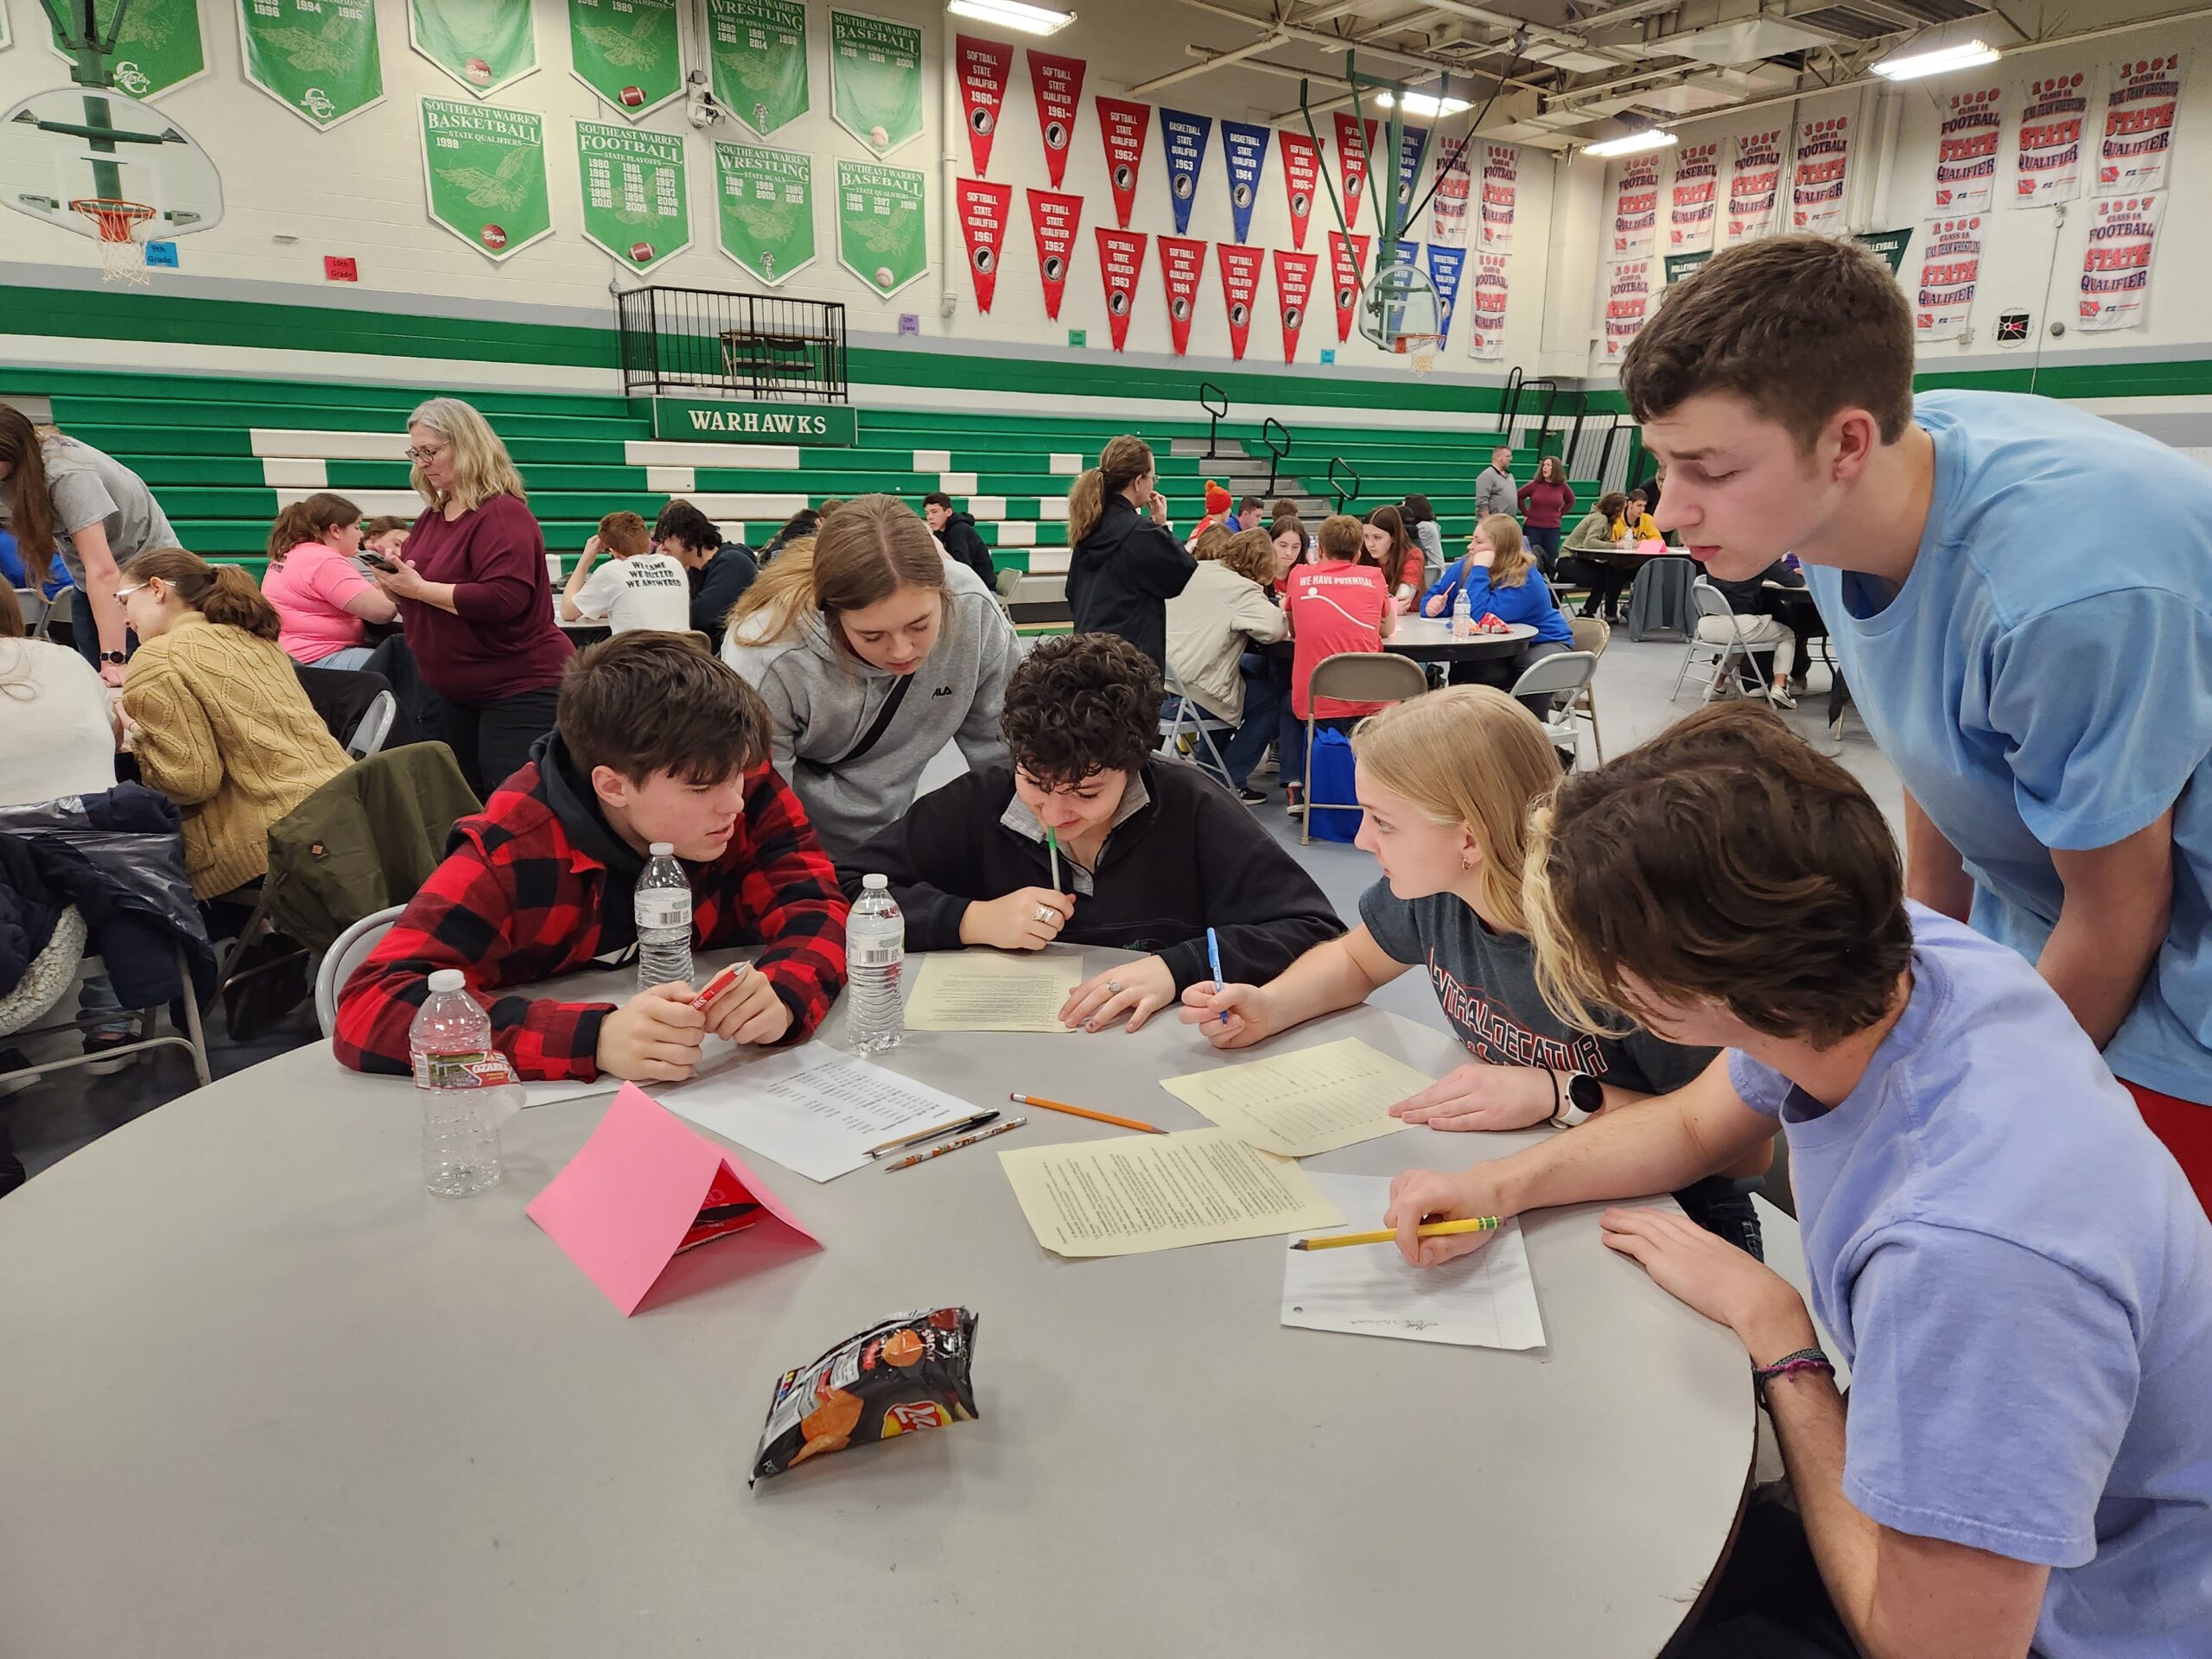 academic team of six high school students works around a round table in a gym to compete in a quiz bowl